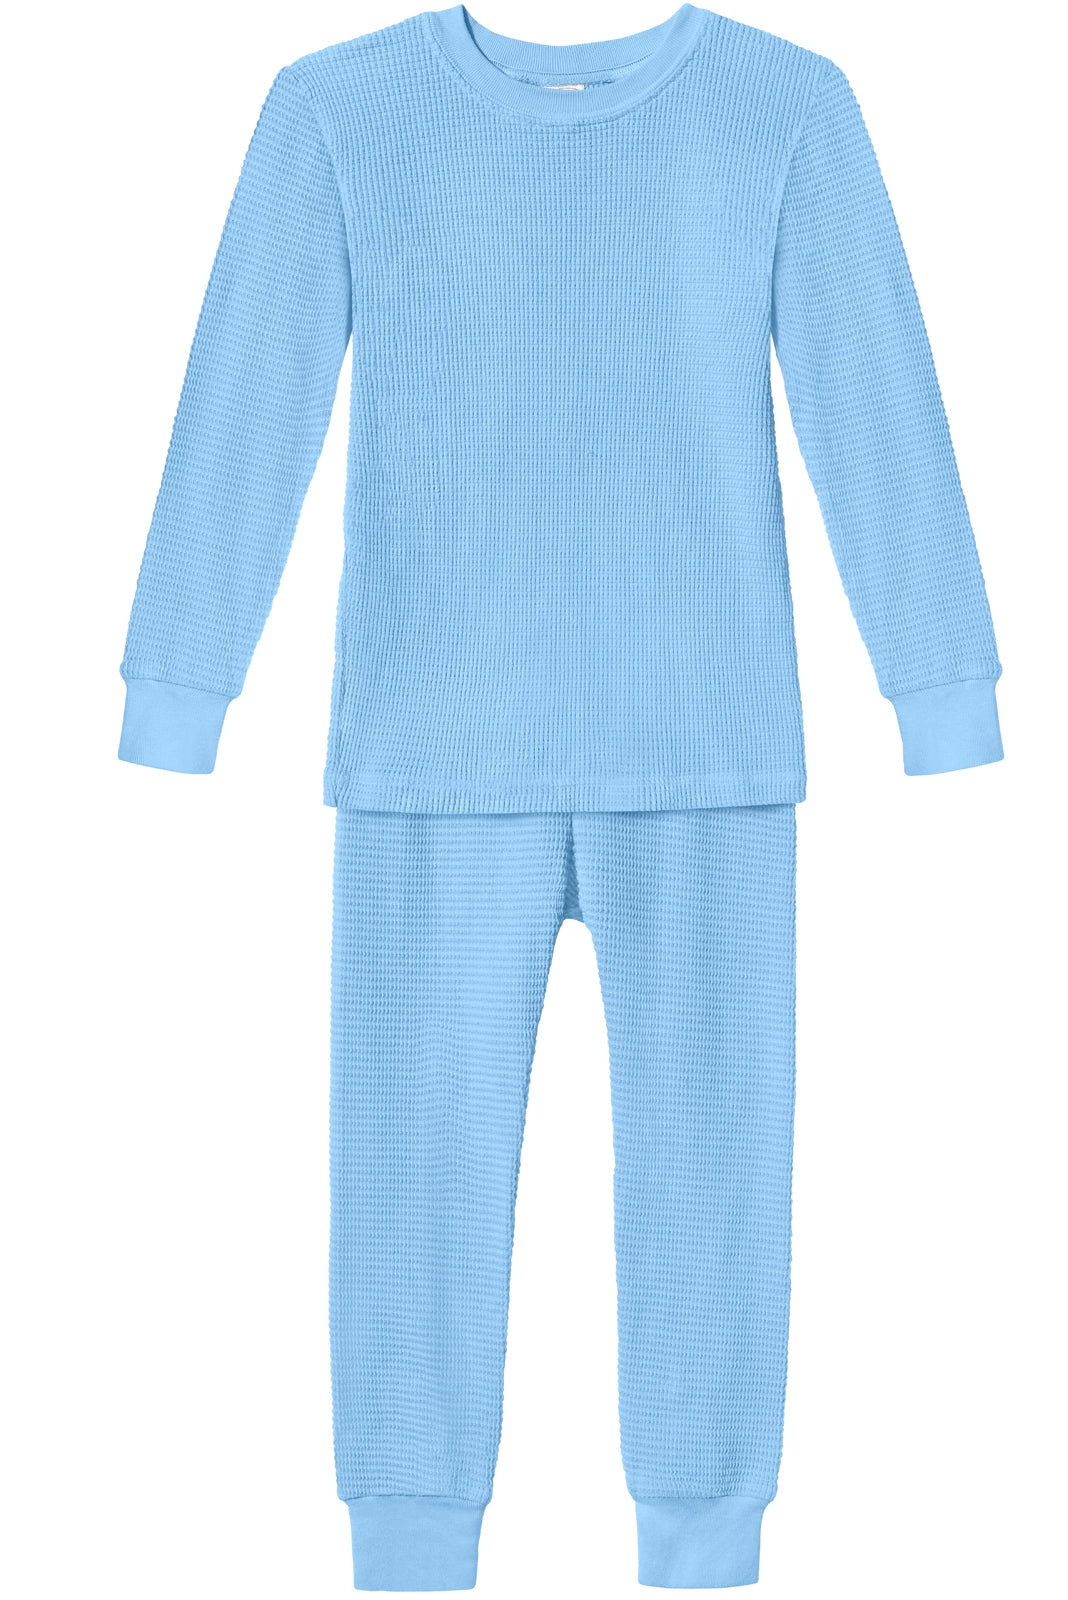  City Threads Little Girls Thermal Underwear Set Perfect For  Sensitive Skin SPD Sensory Friendly Base Layer Thermal Wear Cotton Ski  Clothing For Kids Comfortable Ultra Soft